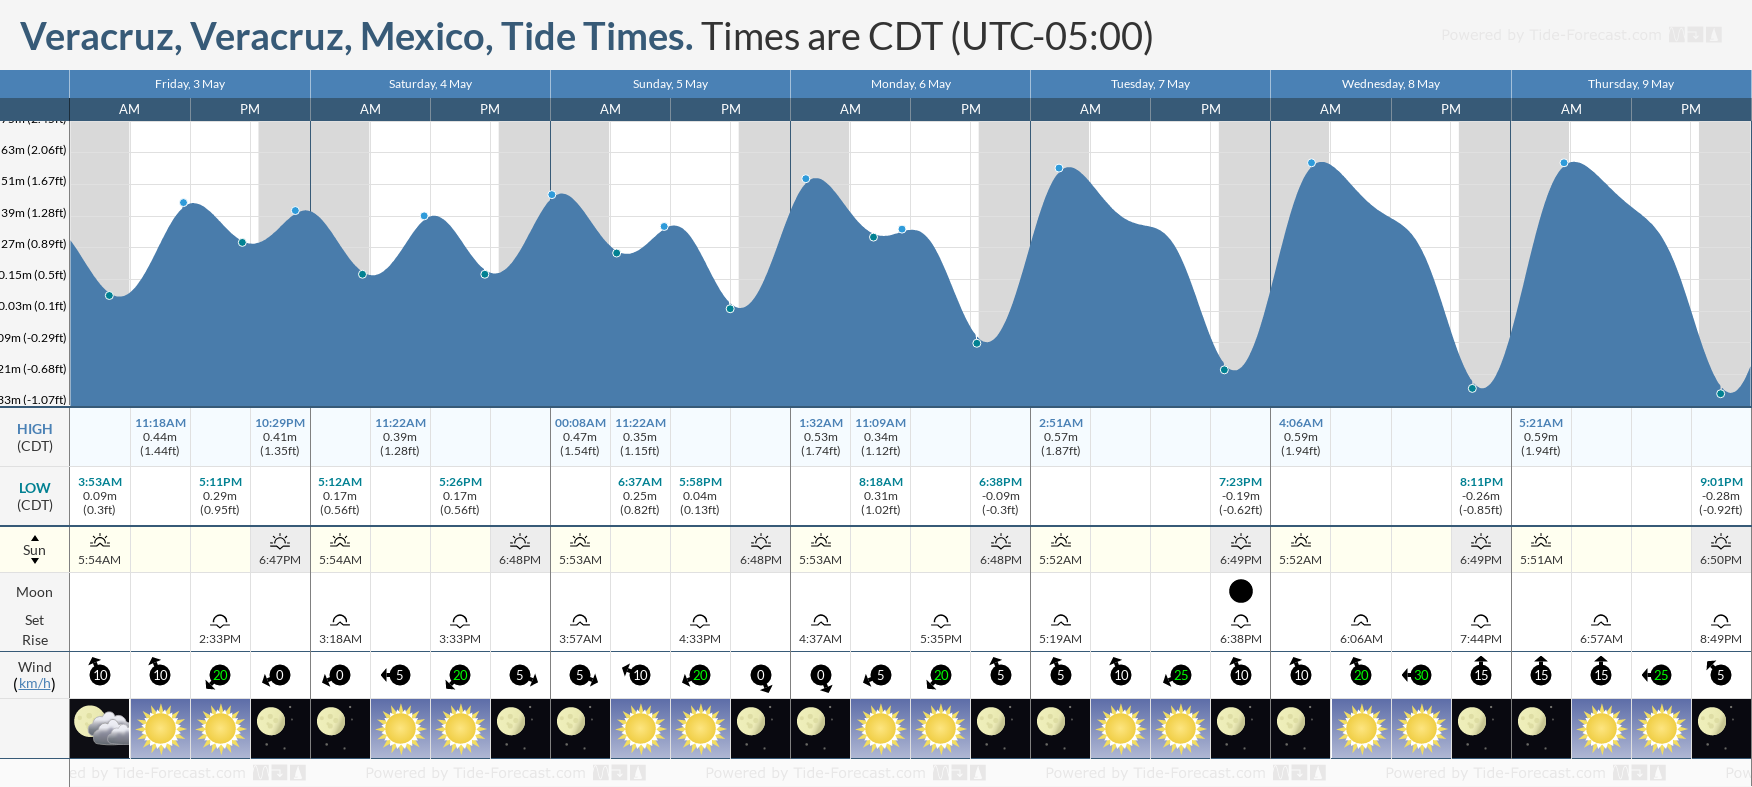 Veracruz, Veracruz, Mexico Tide Chart including high and low tide tide times for the next 7 days